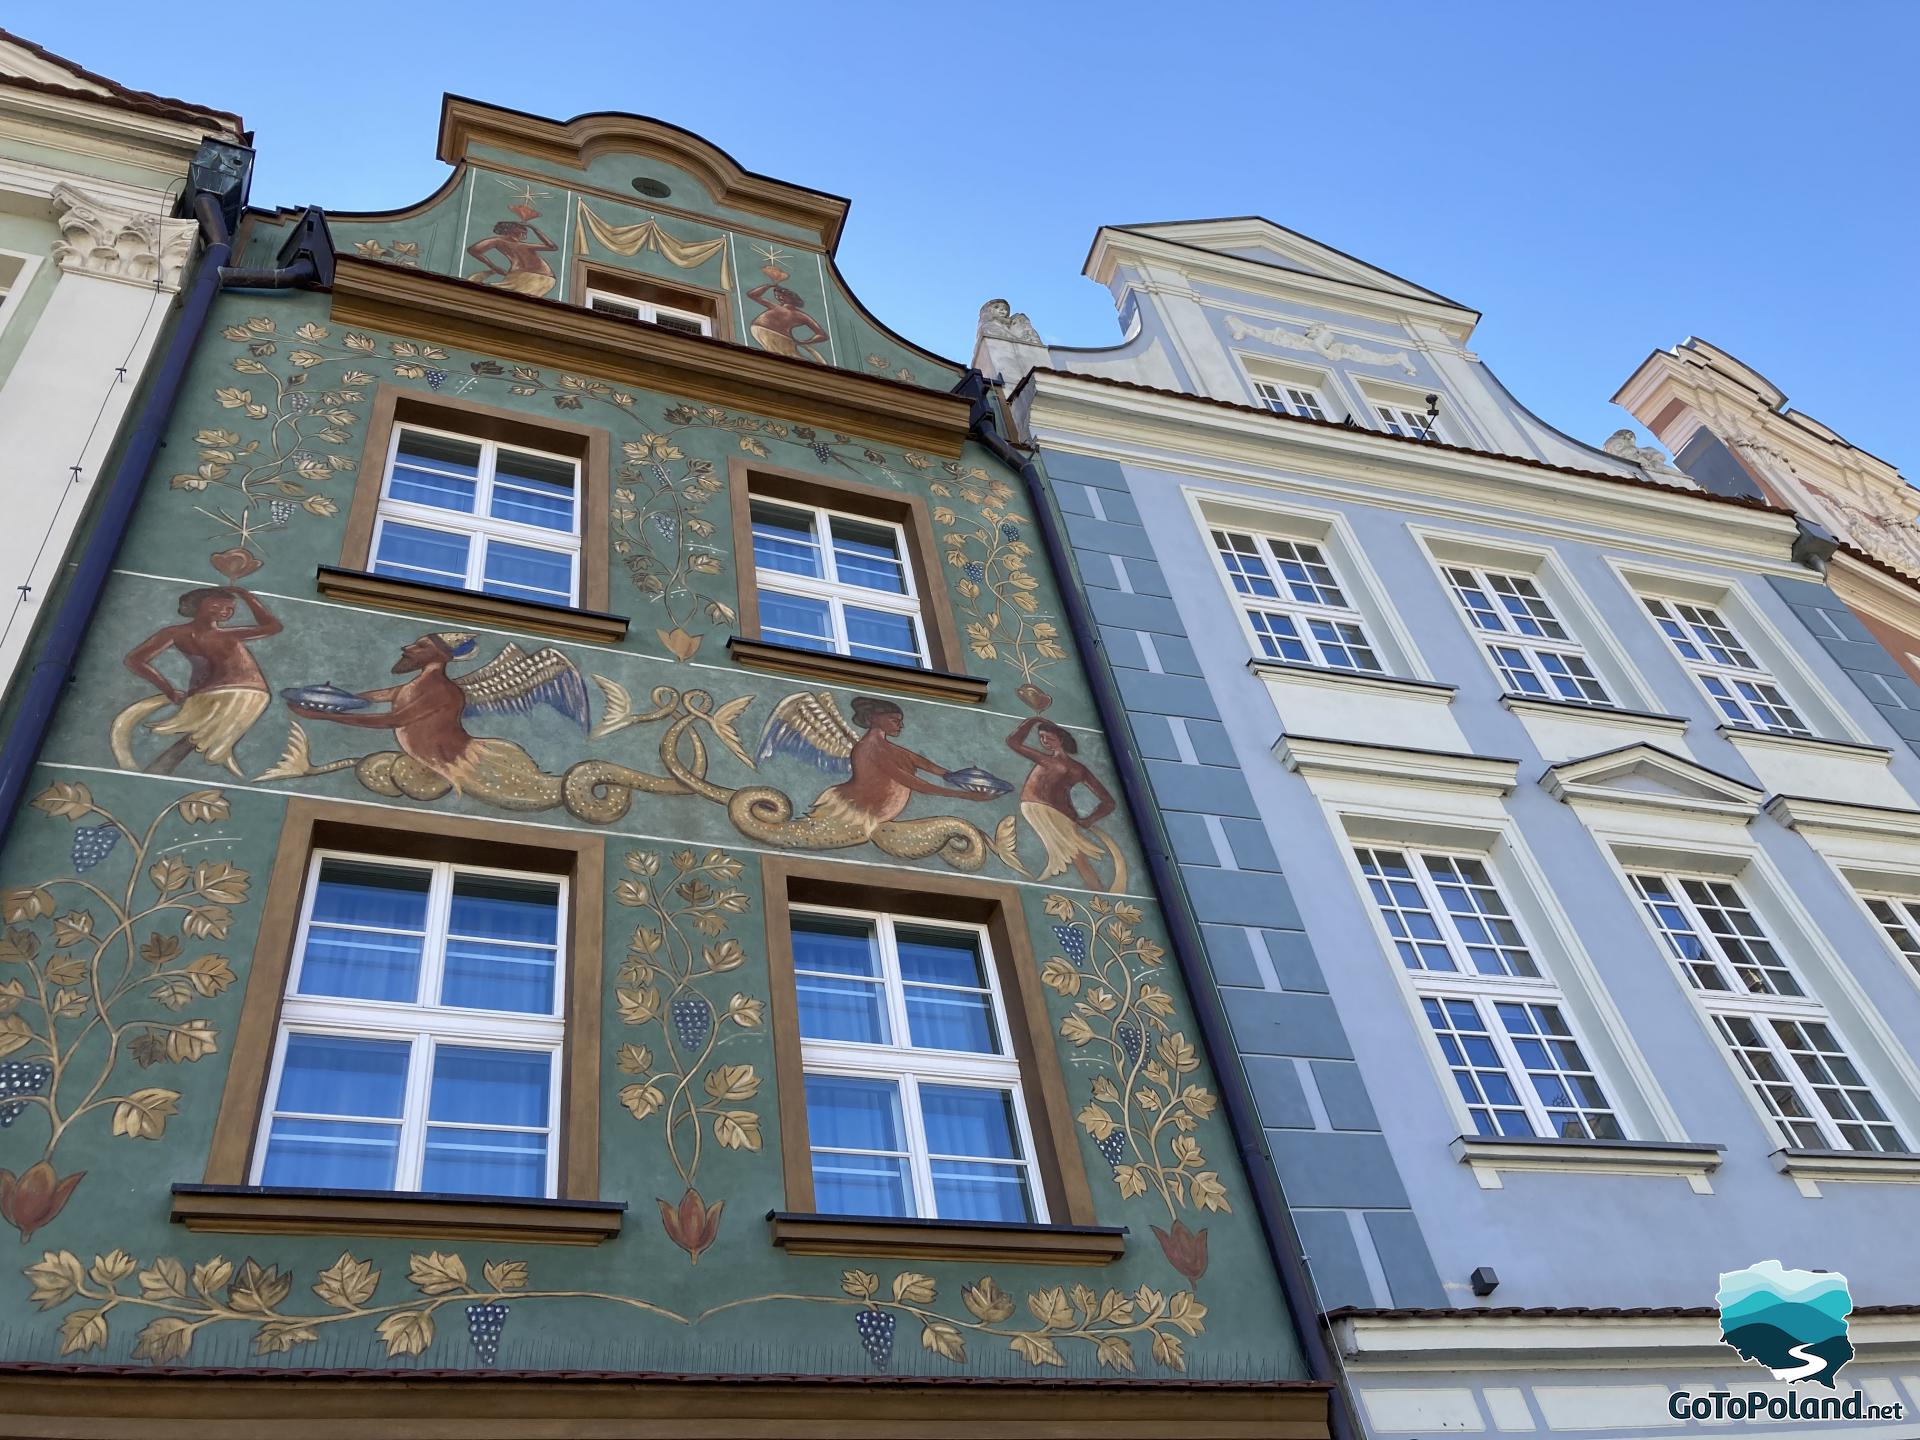 richly decorated facade of the tenement house with drawings of certain figures, leaves and grapes